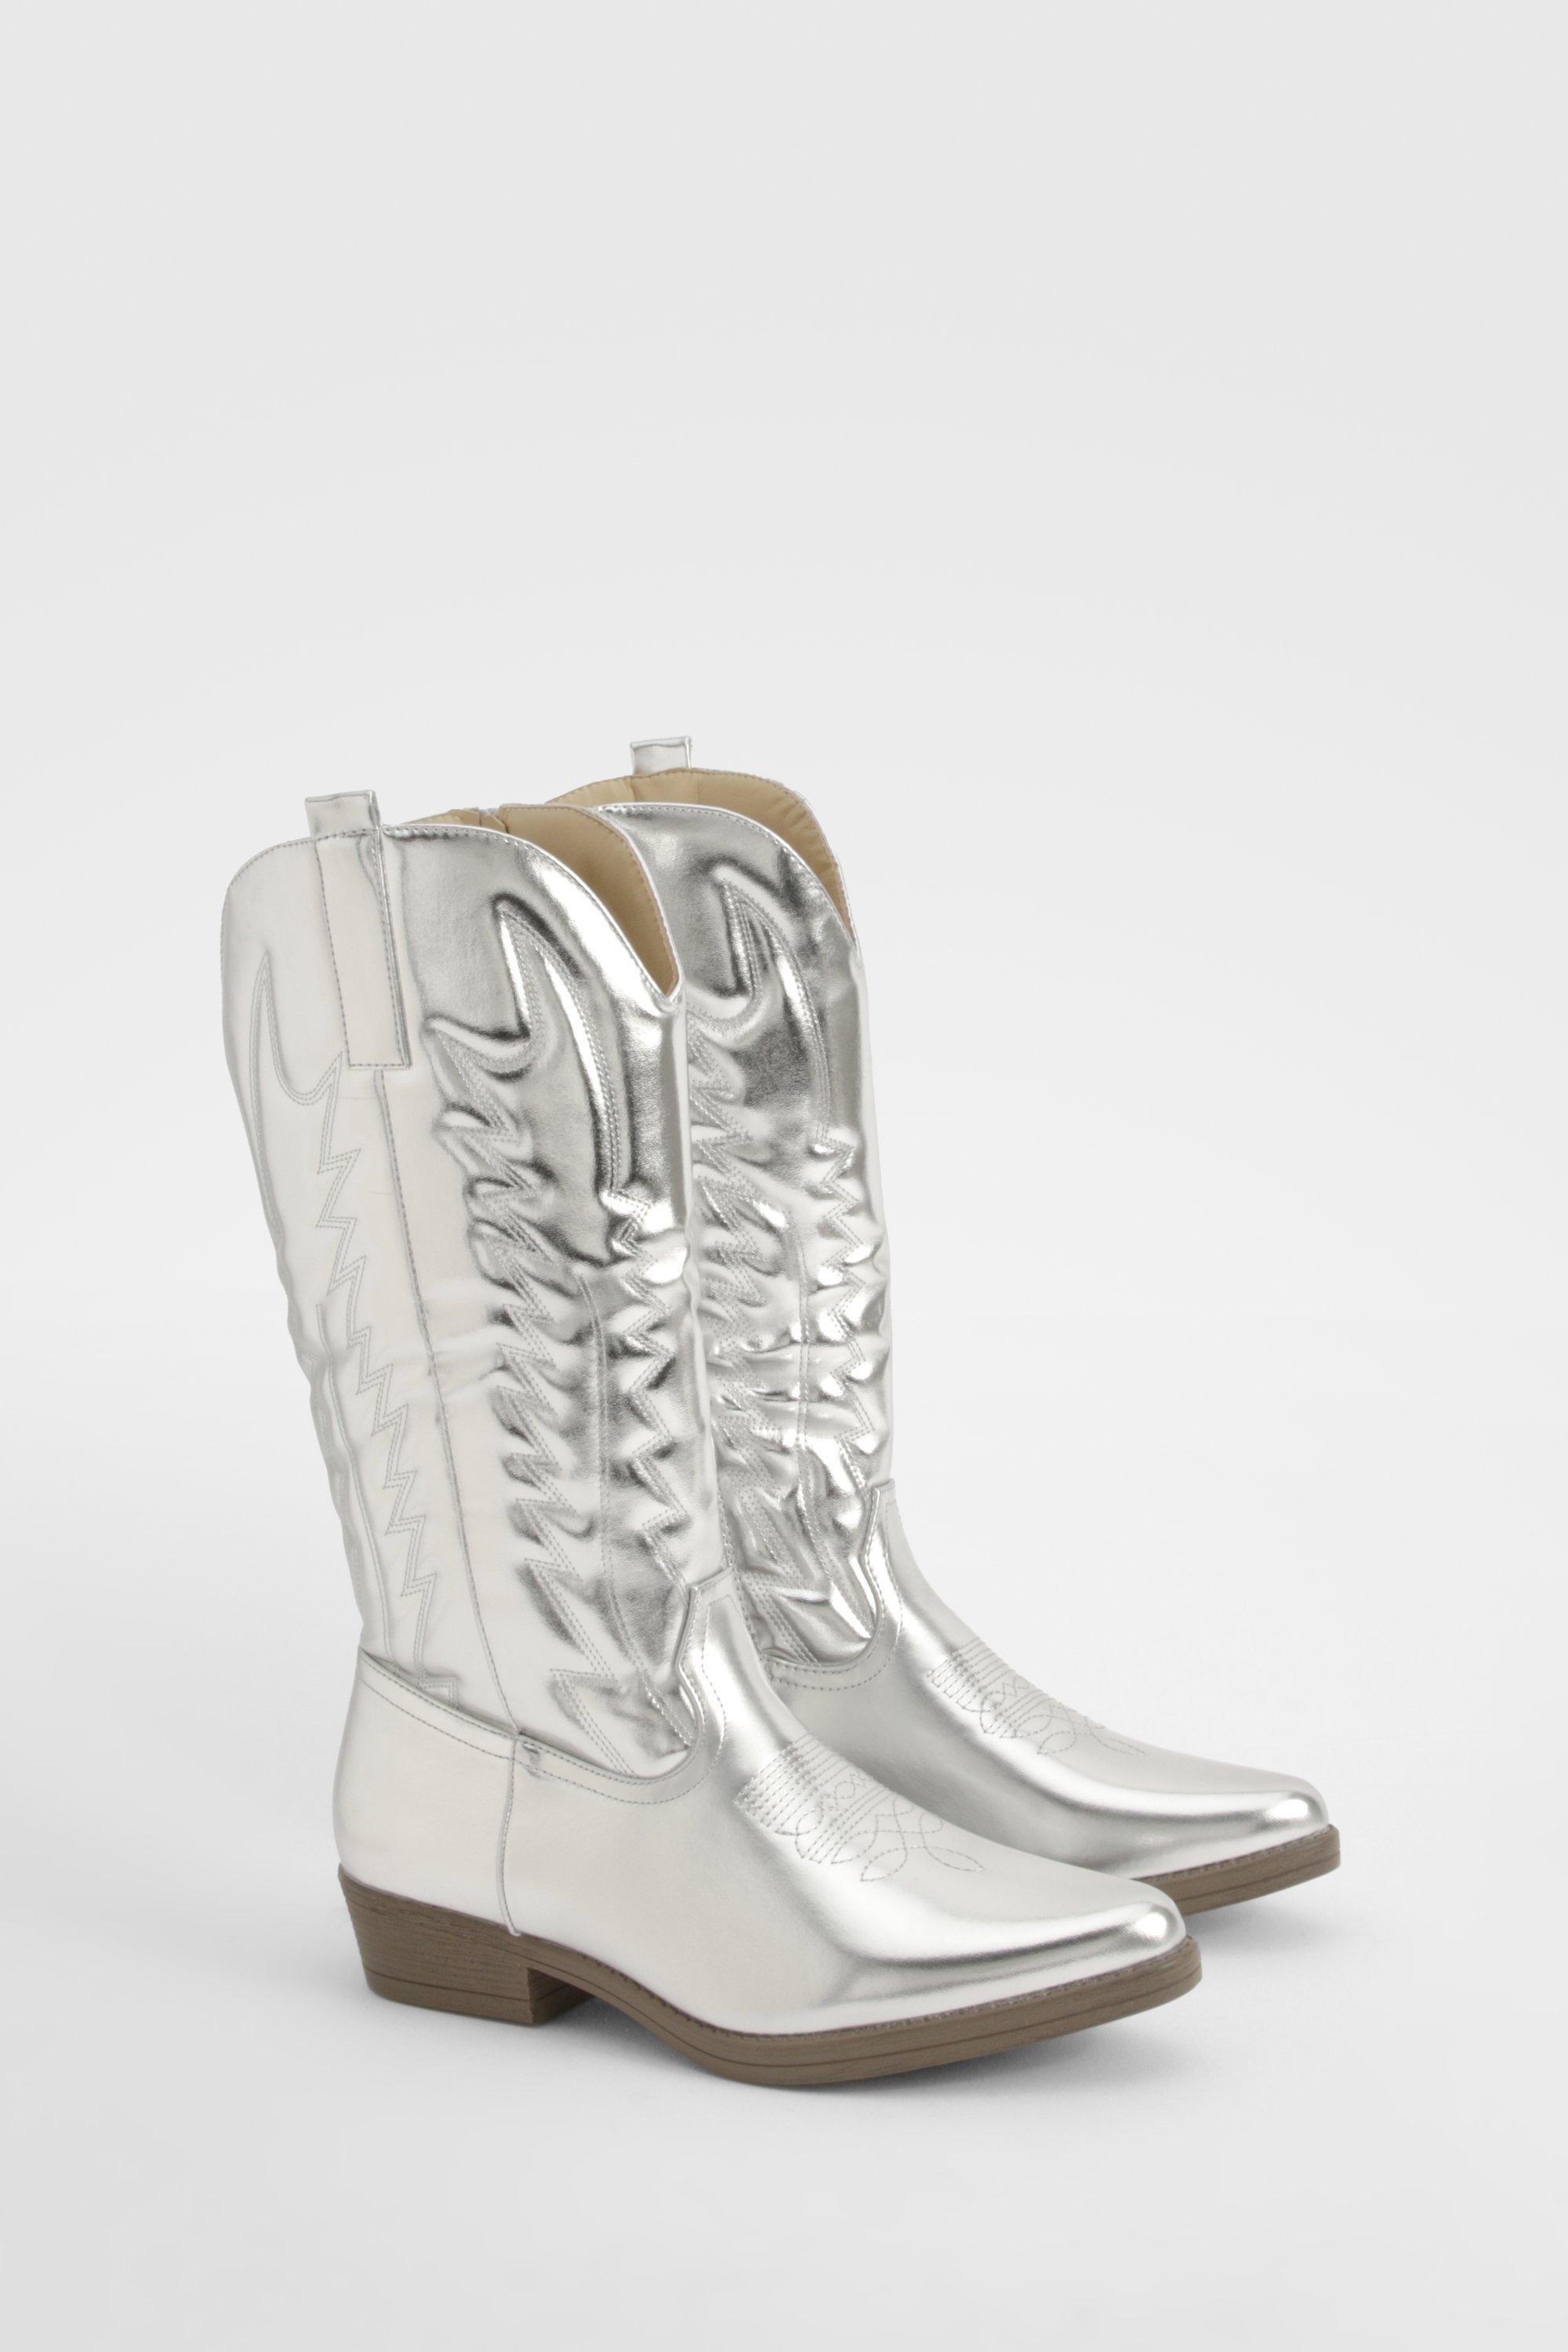 Boohoo Metallic Embroidered Detail Western Cowboy Boots, Silver